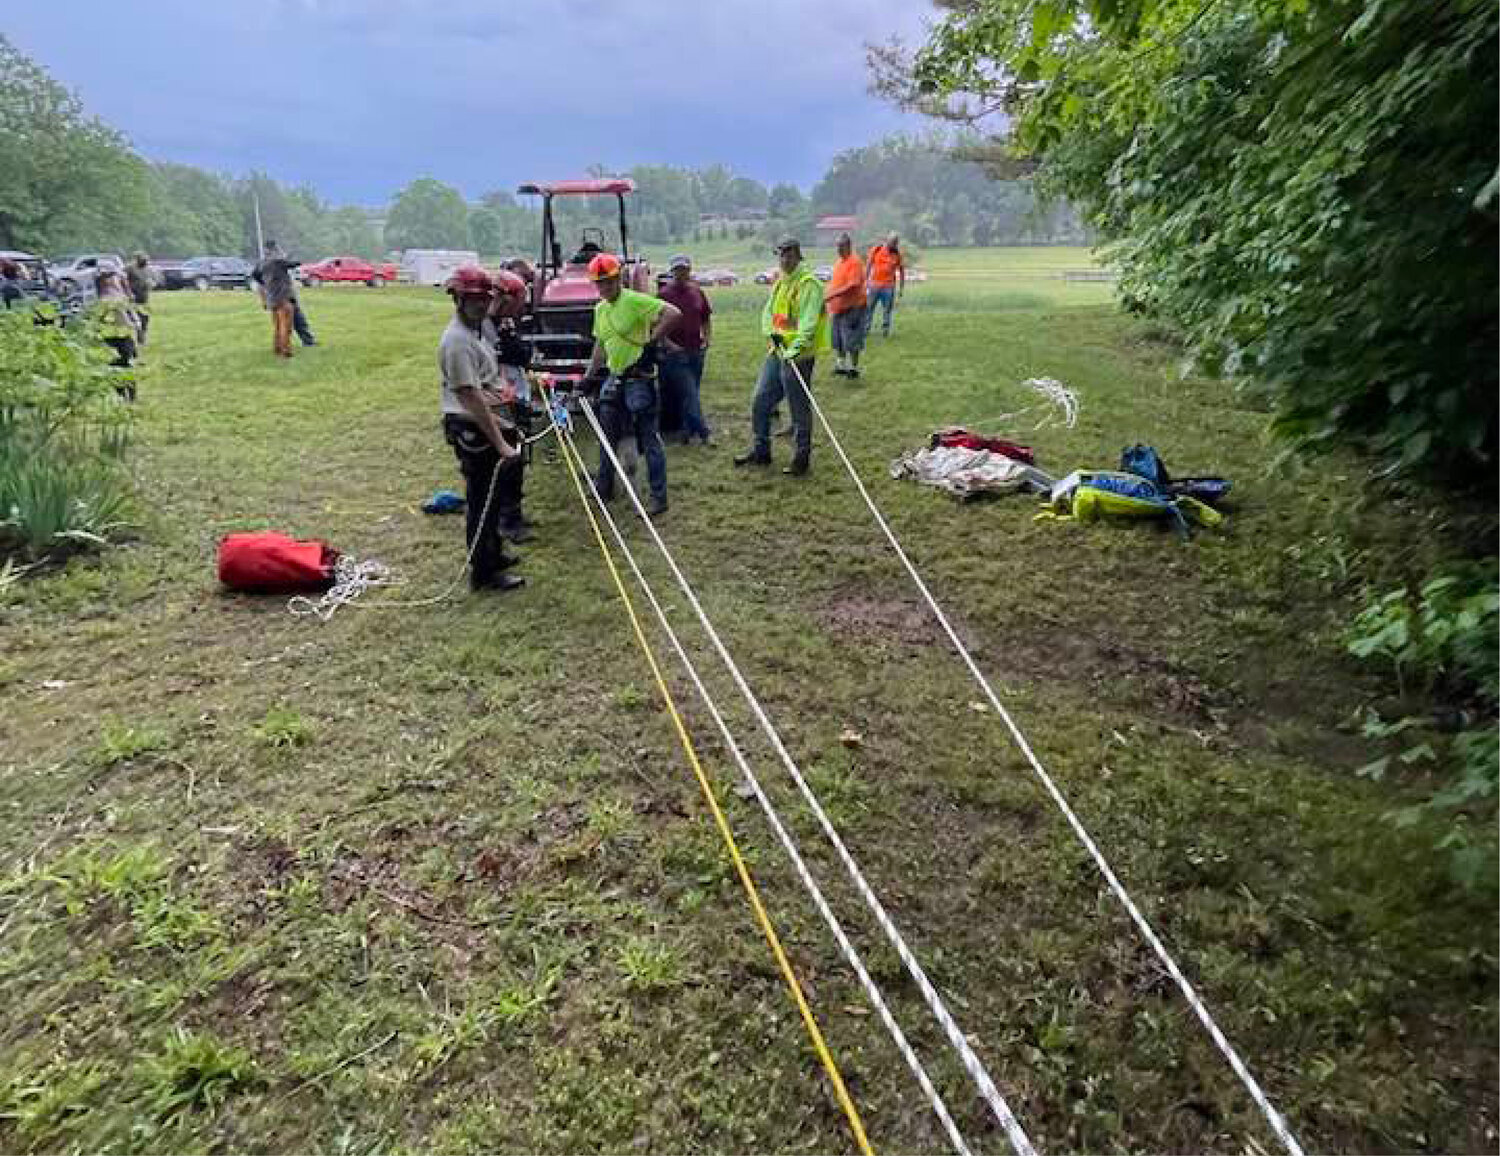 Sparta-White County Rescue Squad arrived on the scene and set up a rope system to lower a member of the team over the bluff, with a small animal harness to assist in retrieval of a dog.